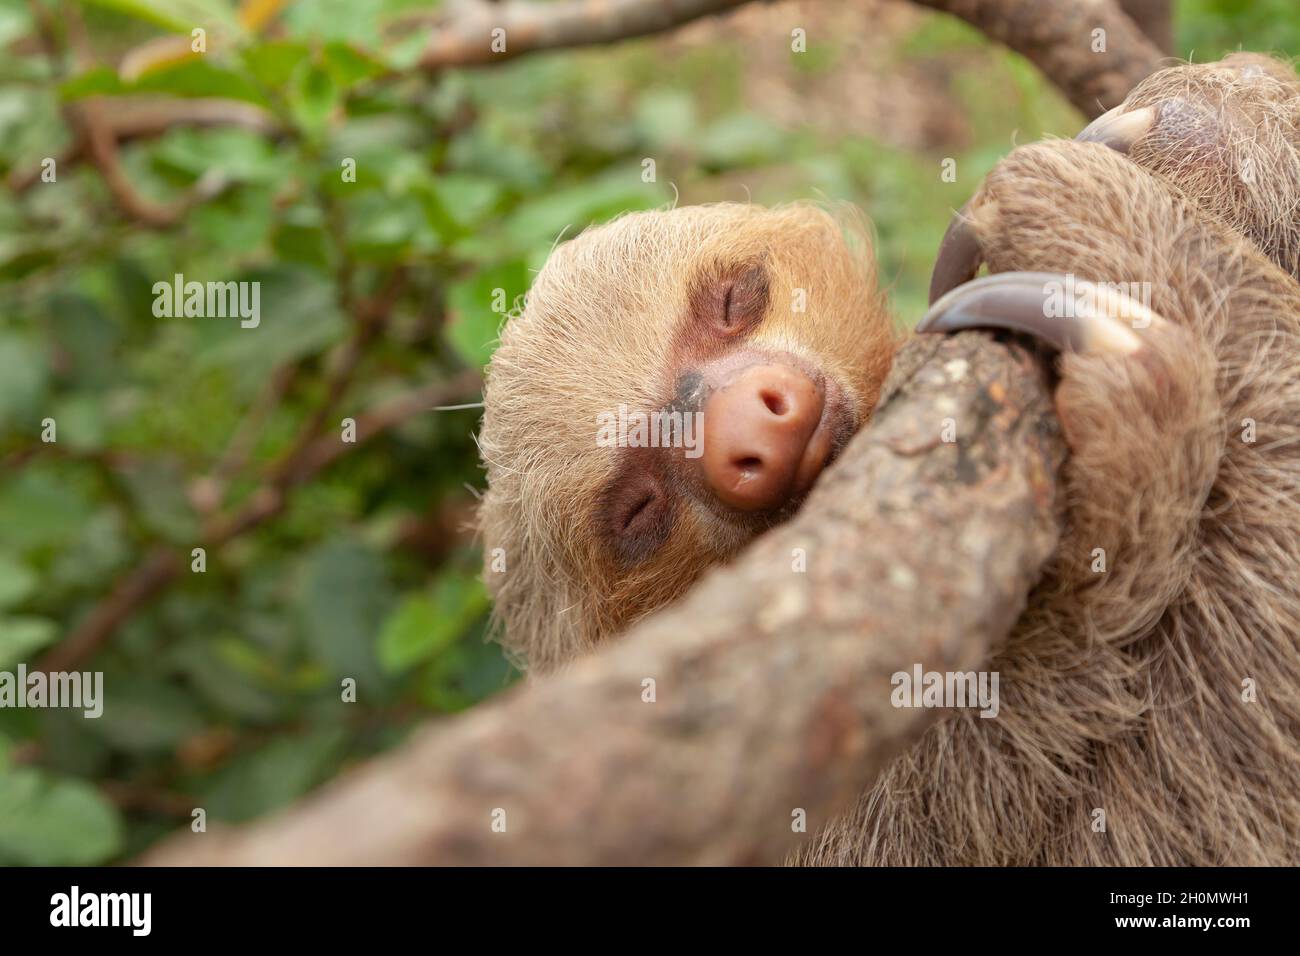 Specimen of Hoffmann's two-toed sloth, or Choloepus hoffmanni, clinging to a branch, asleep, in the Amazon rainforest, at the Dos Loritos wildlife res Stock Photo